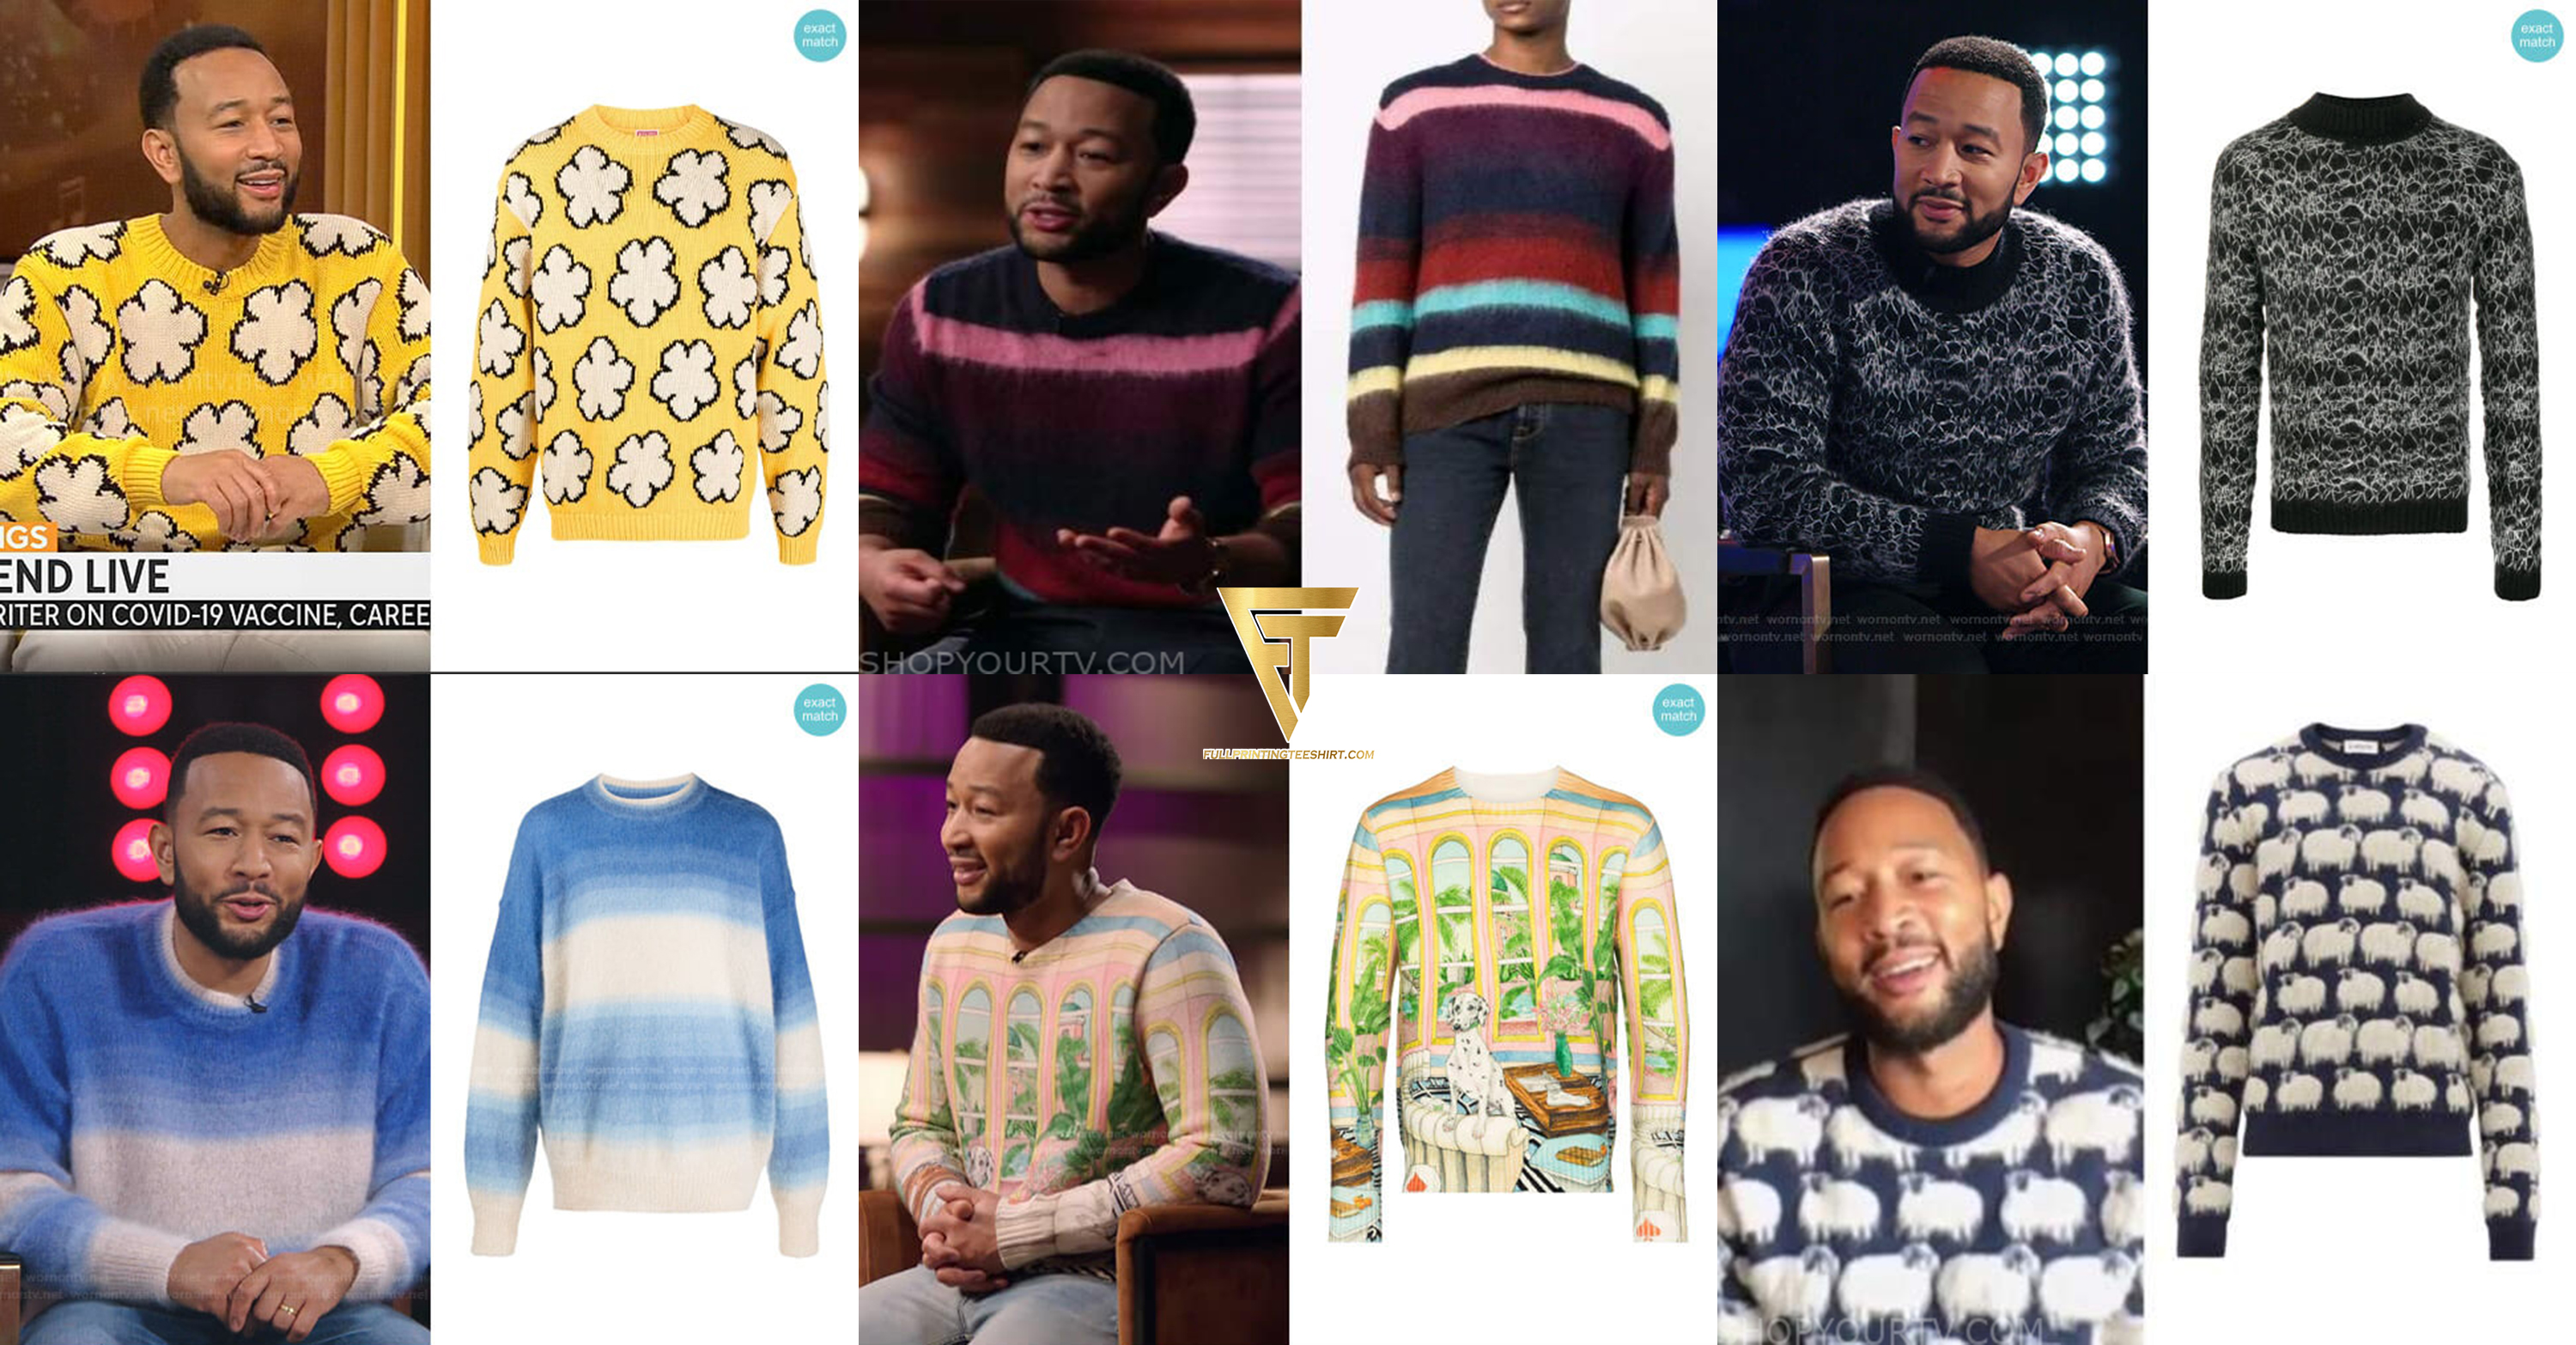 John Legend The Iconic Sweater Collection on 'The Voice